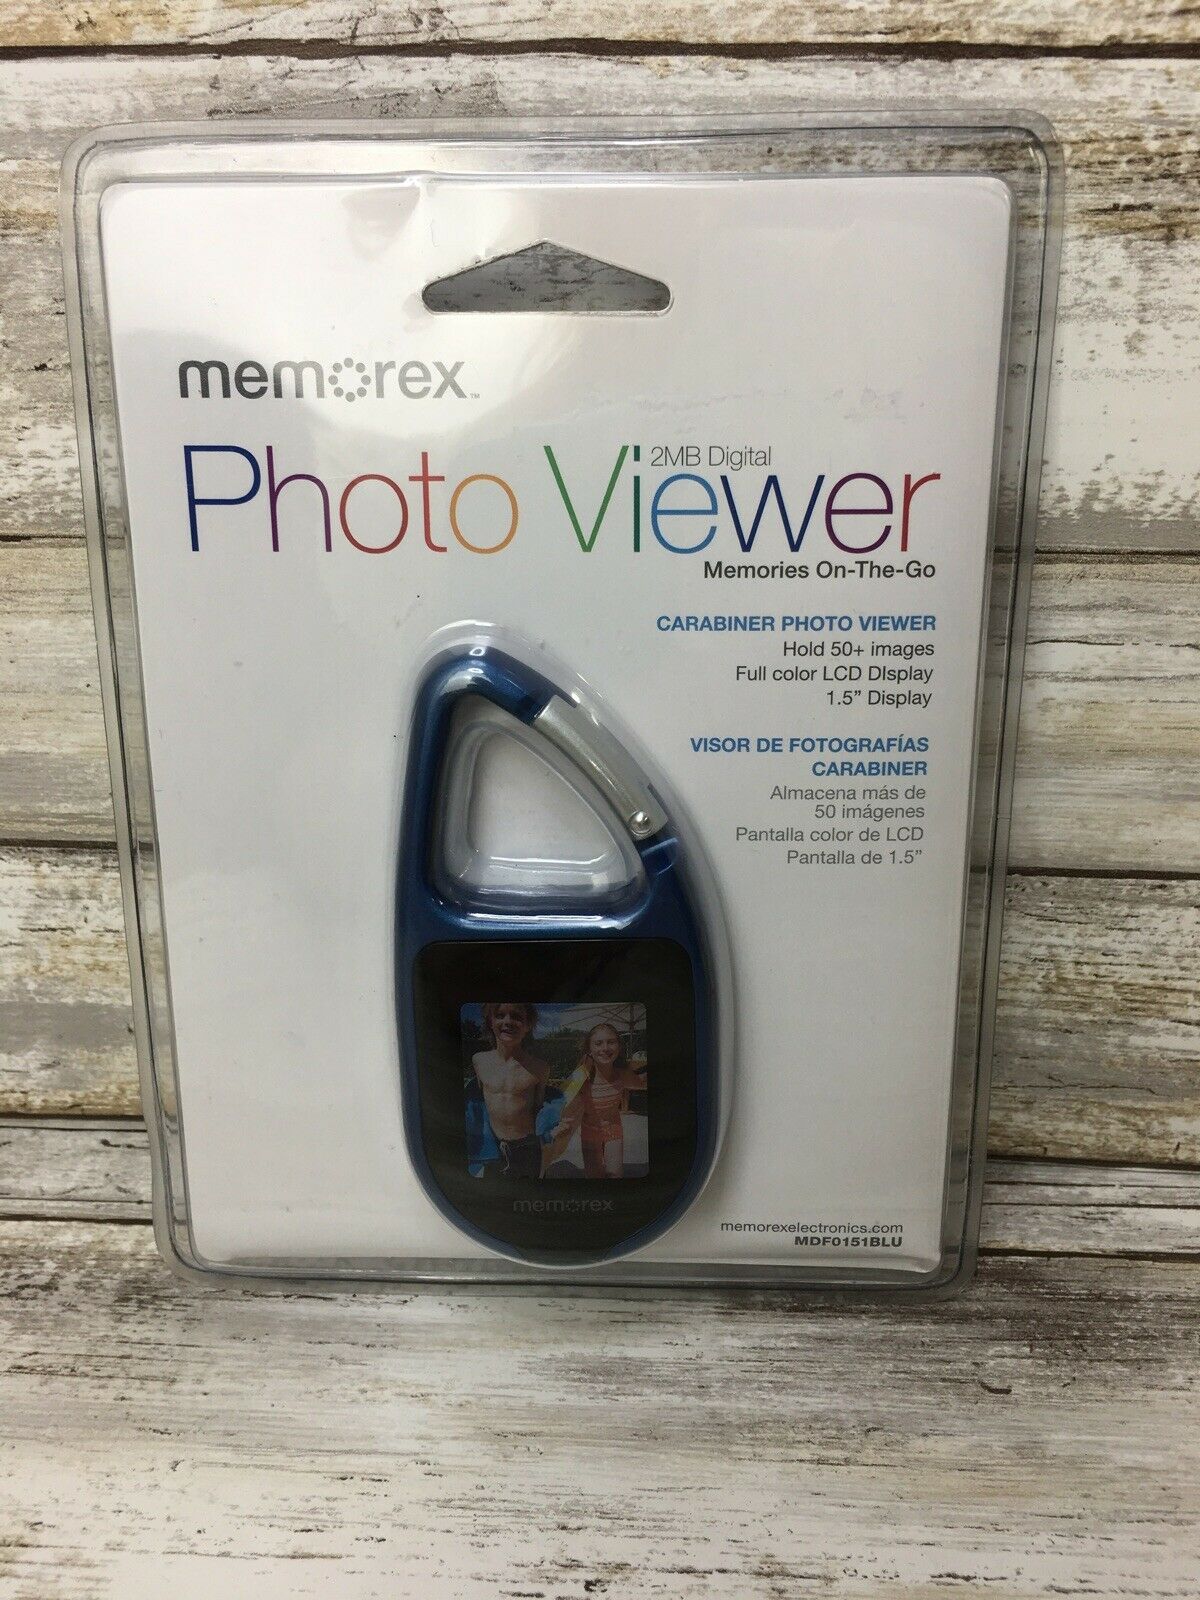 Primary image for Memorex Photo Viewer Carabiner 2MB Digital Memories On-the-Go New